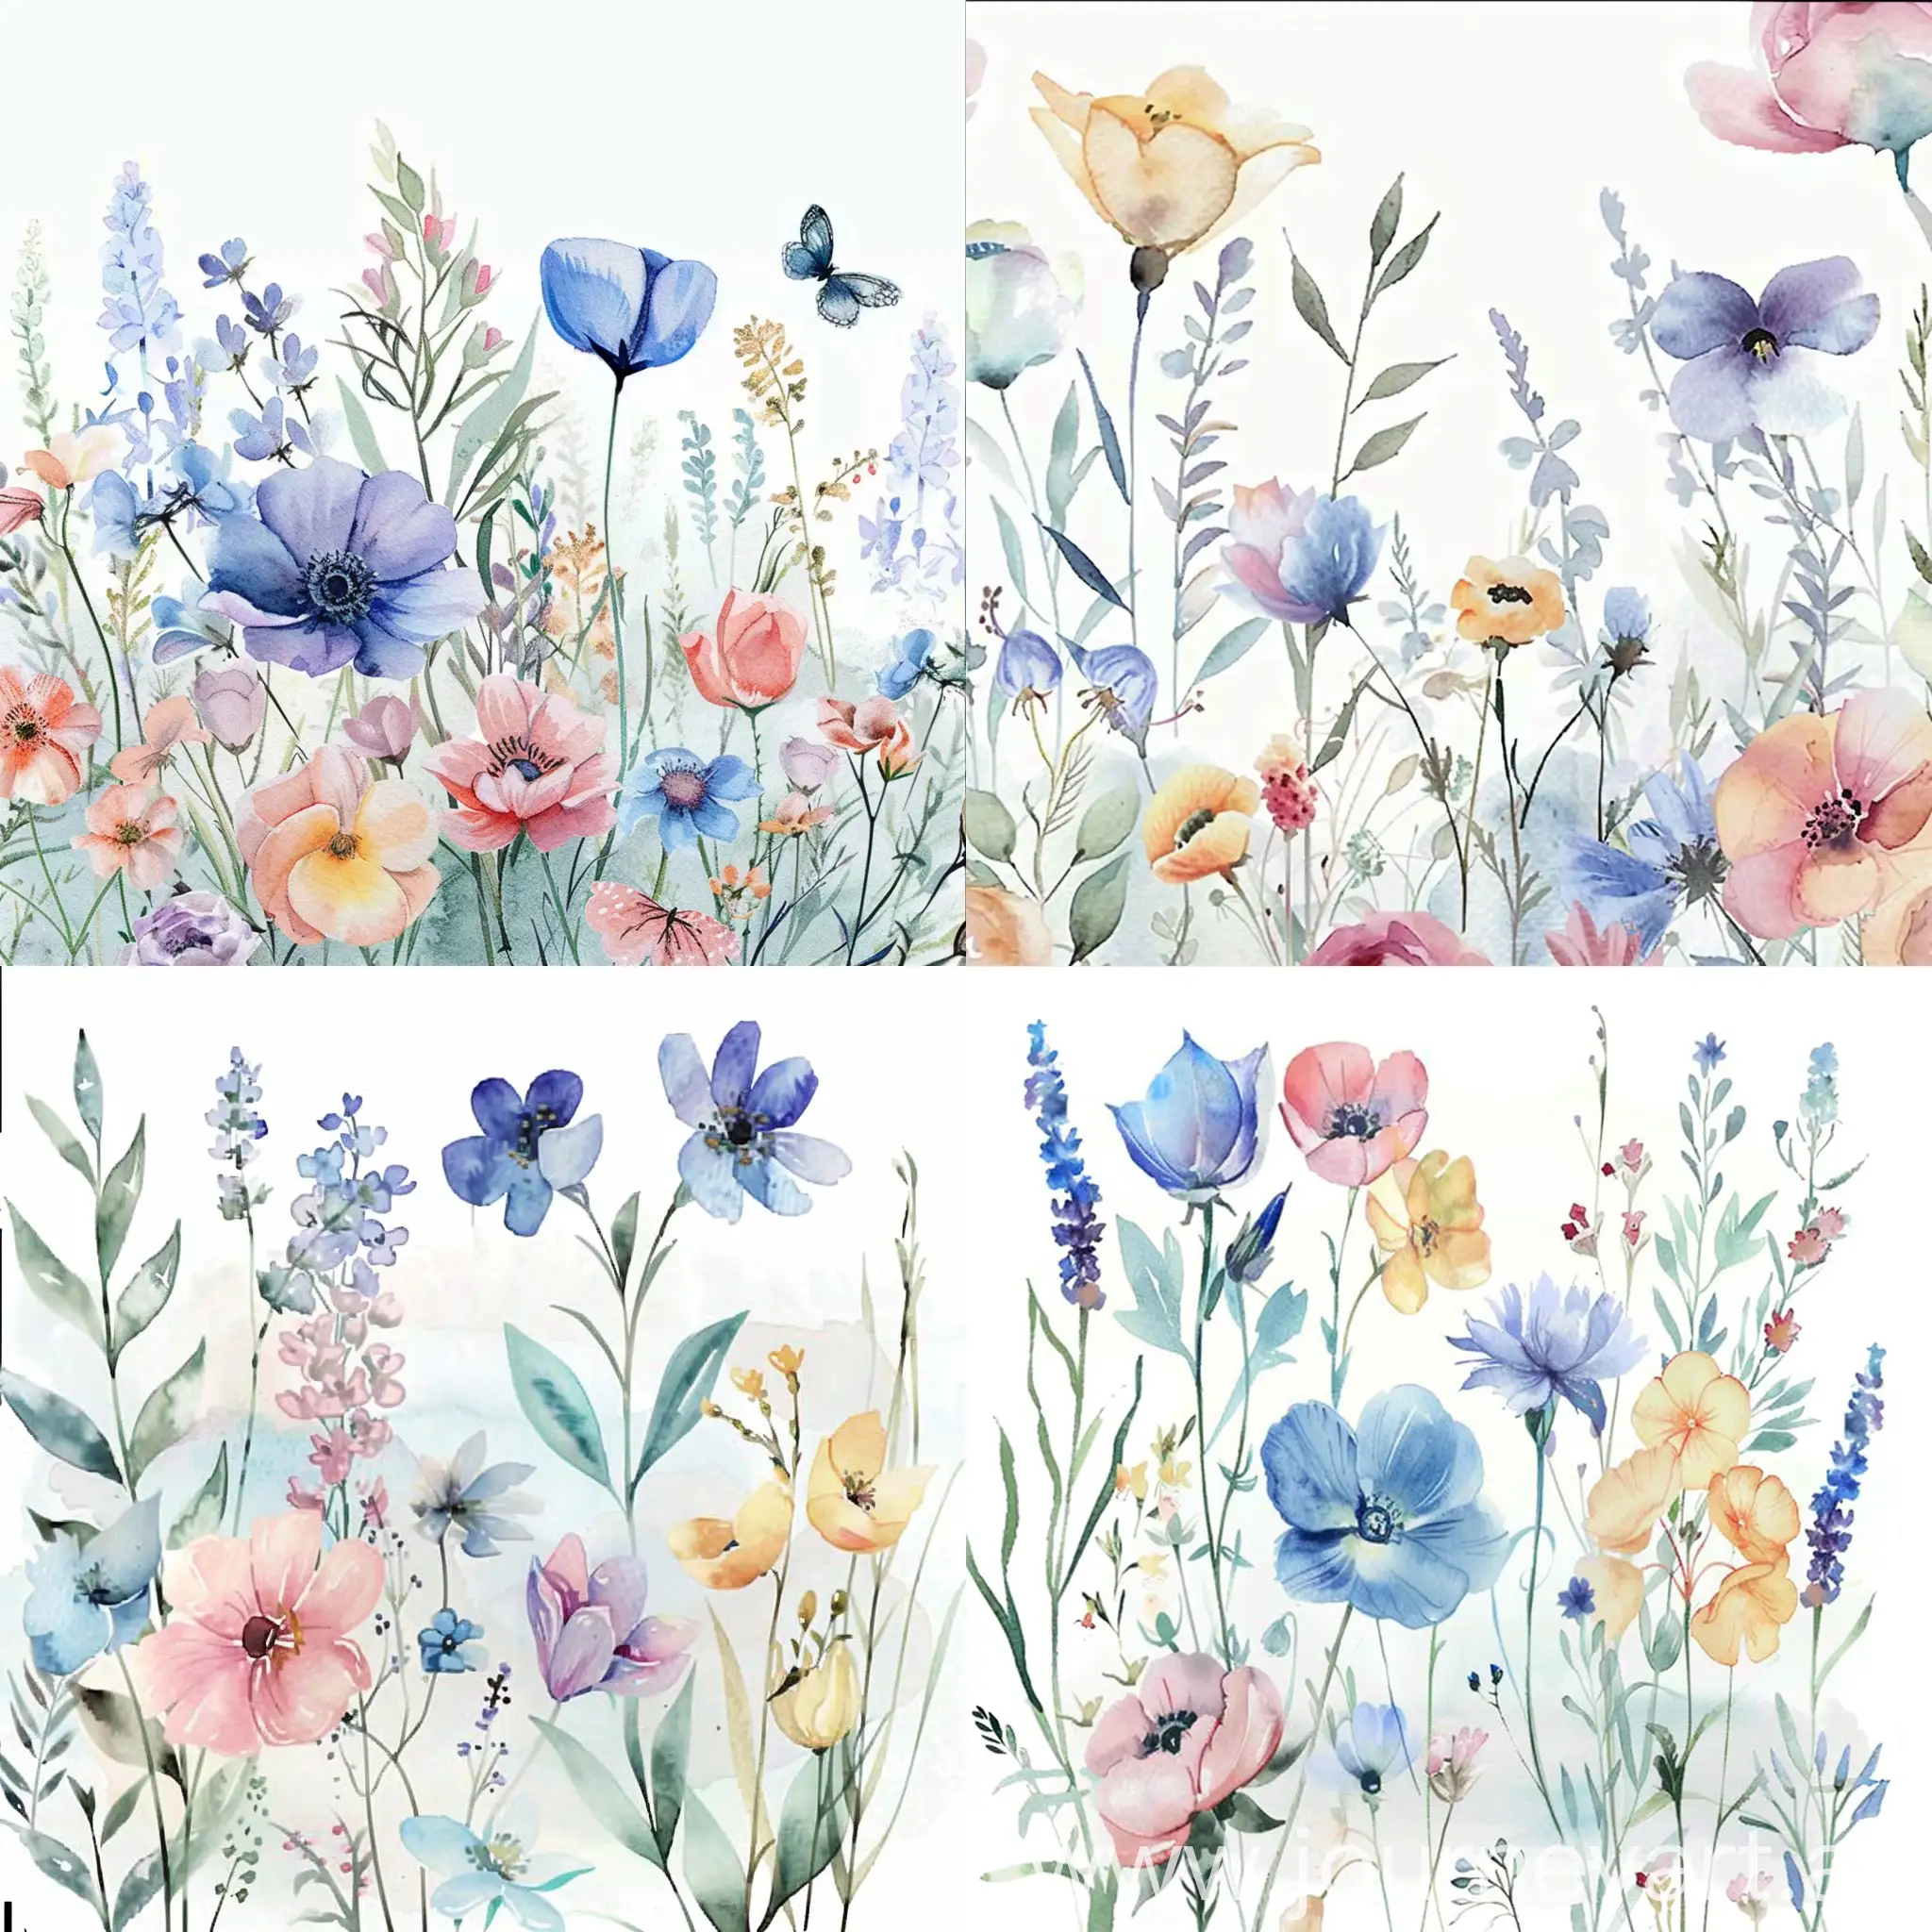 Soft Handpainted Watercolor Wildflowers on White Background